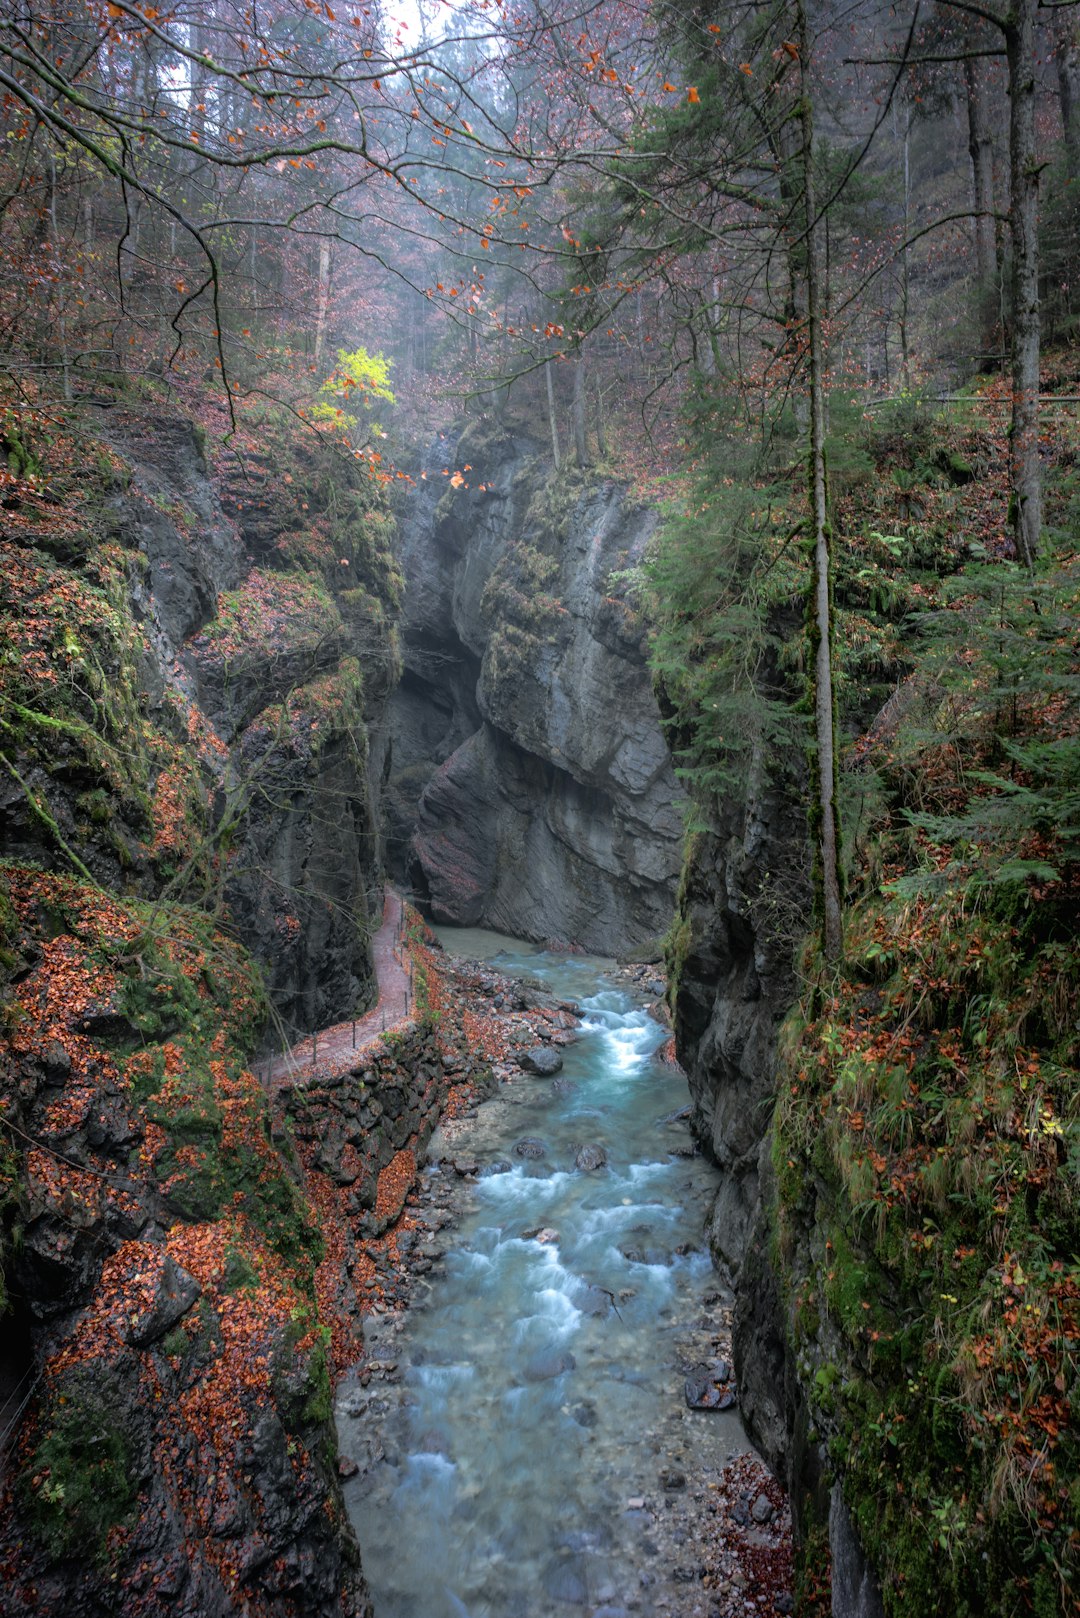 Travel Tips and Stories of Partnach Gorge in Germany